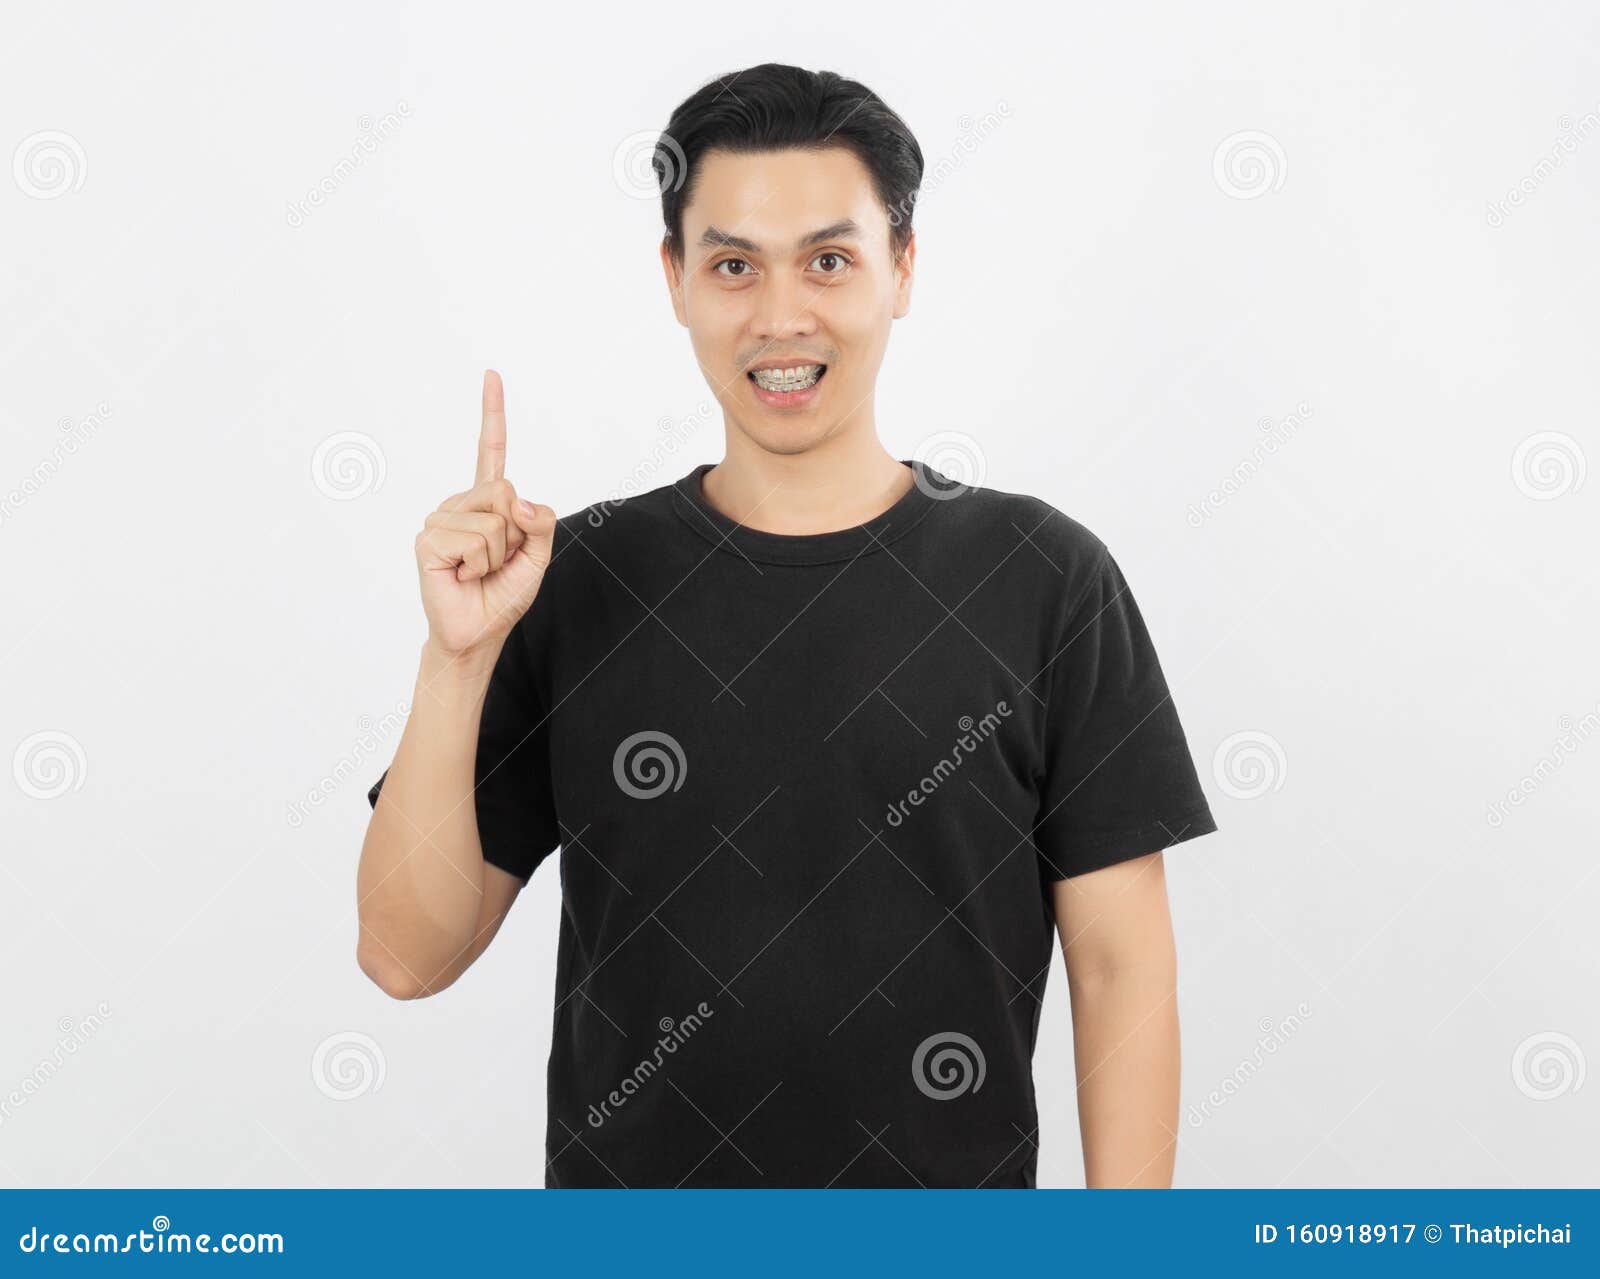 Young Handsome Asian Man Smiling With Braces And Looking At Camera With ...